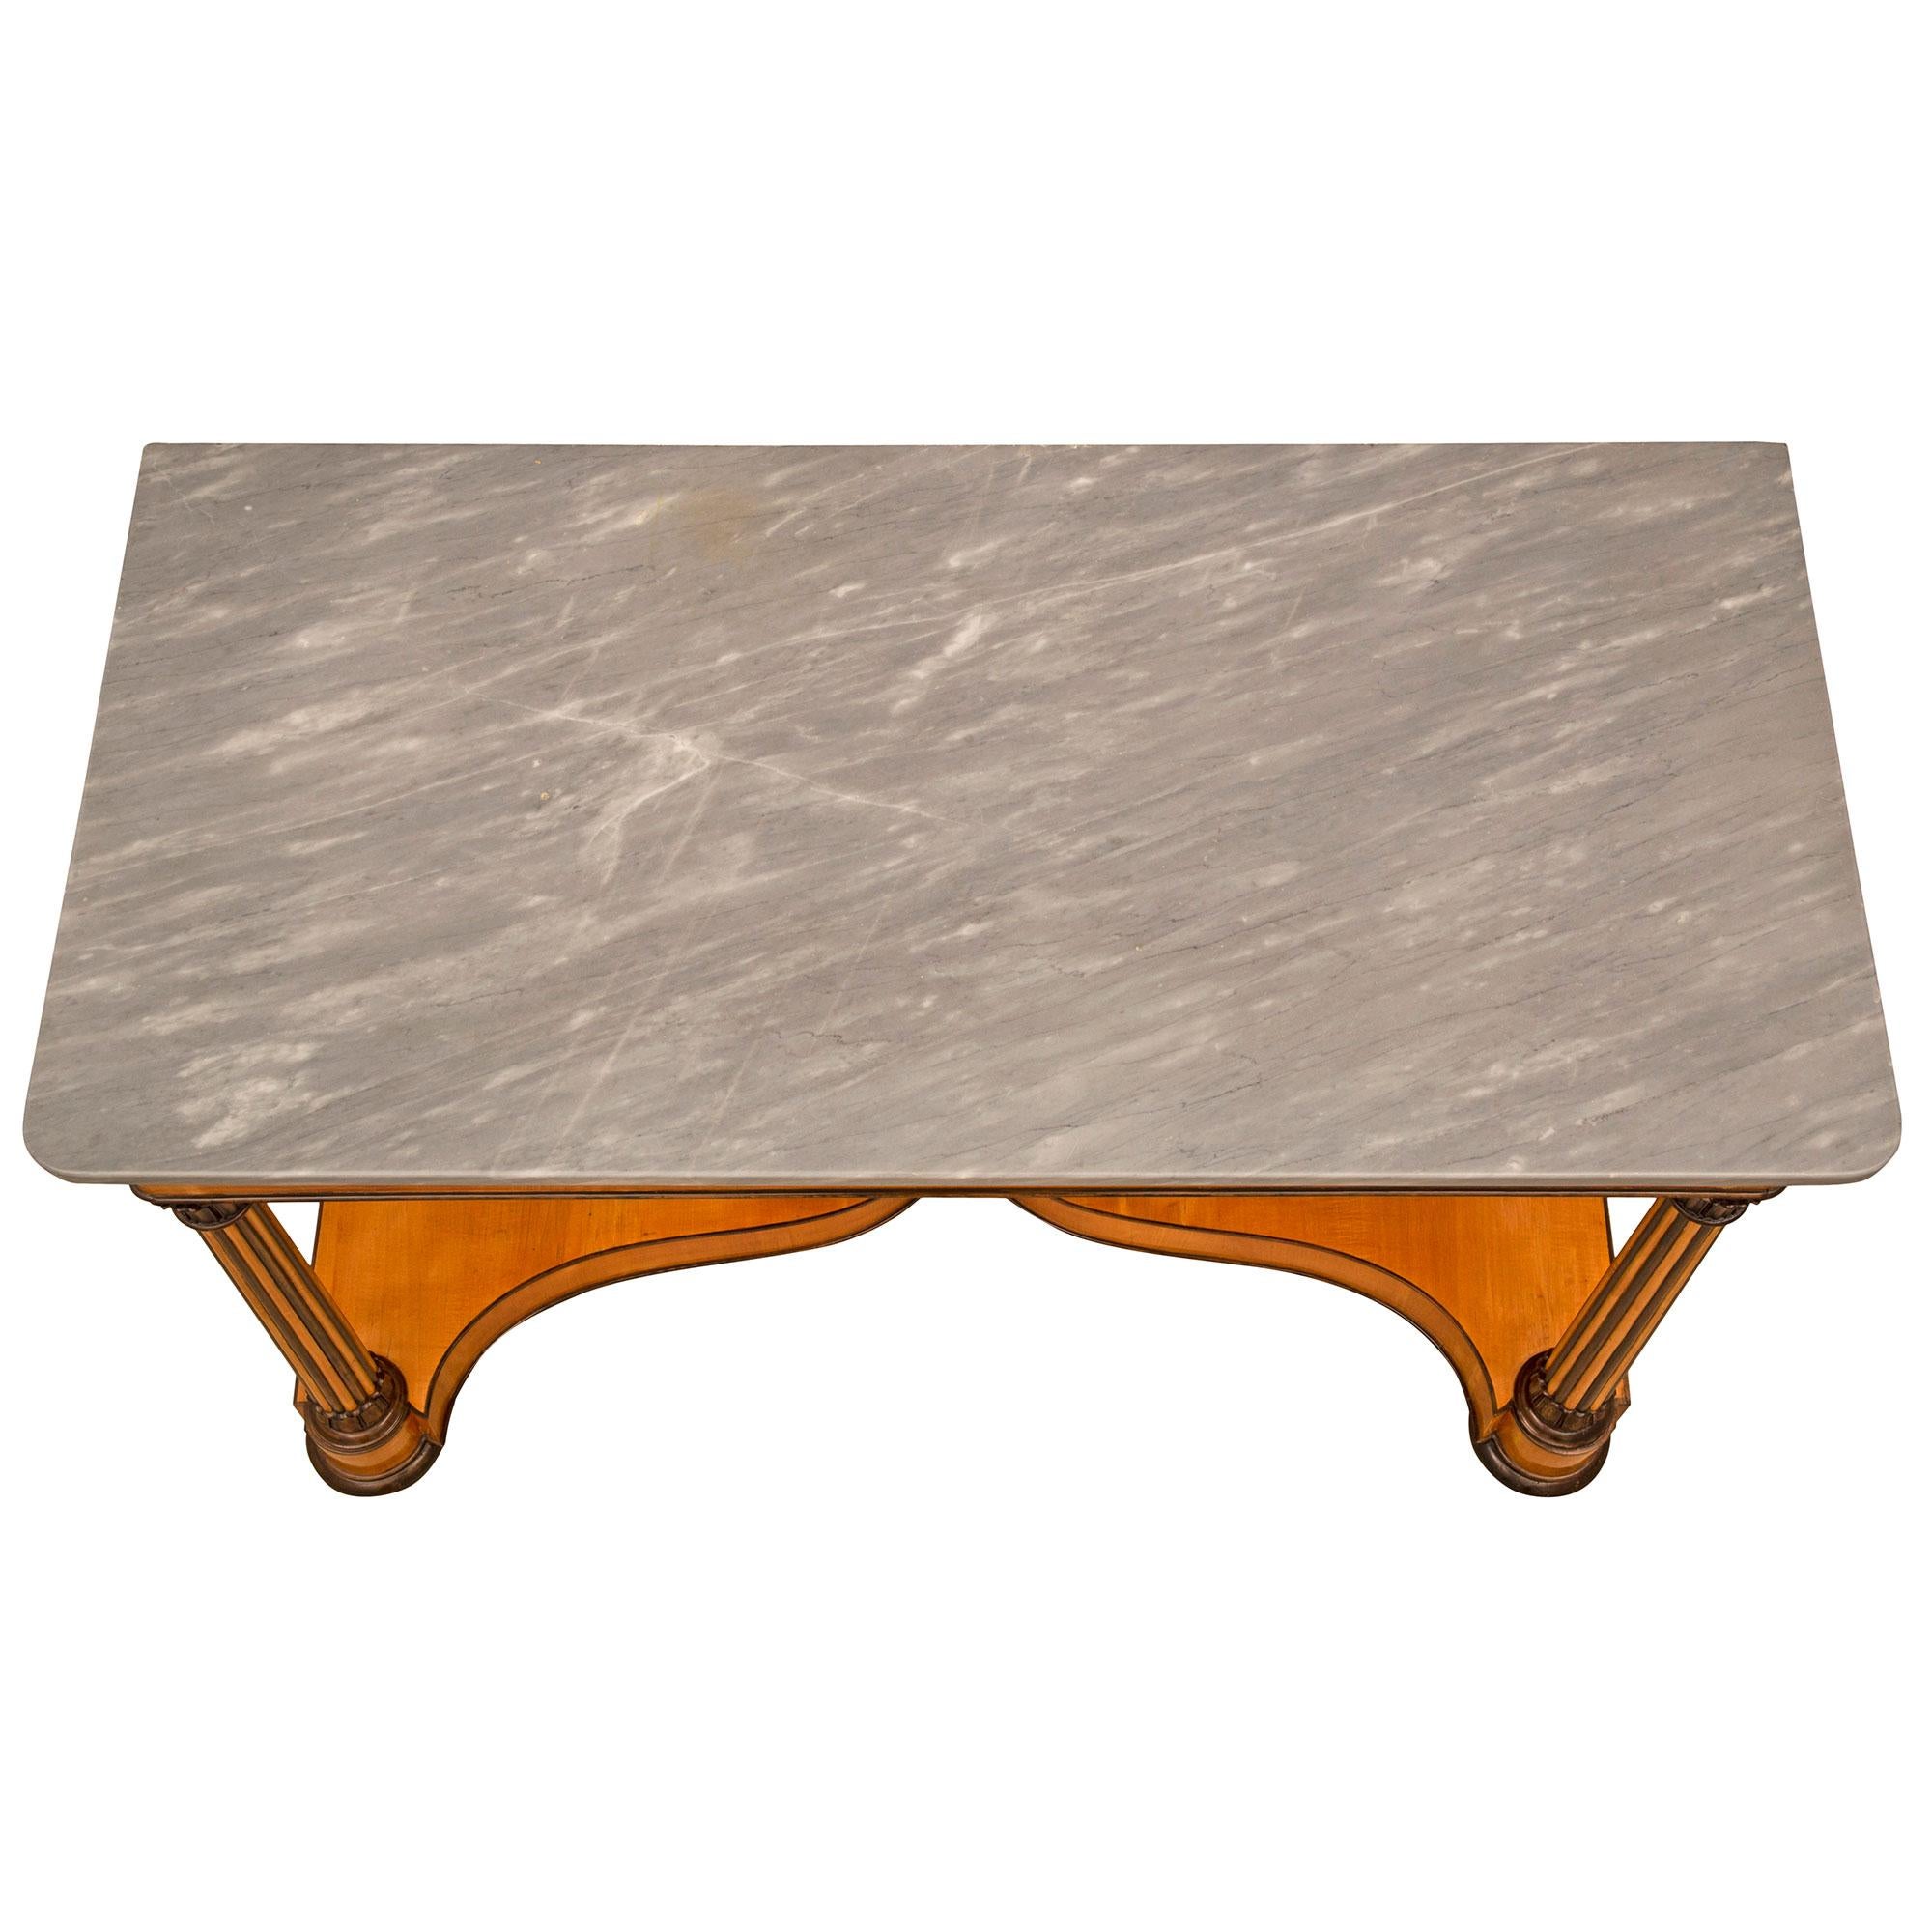 A handsome and extremely decorative Italian 19th century Charles X st. Cherrywood Birchwood and Gris St. Anne marble console. The uniquely designed freestanding console is raised by elegant bun feet below impressive lightly tapered circular fluted